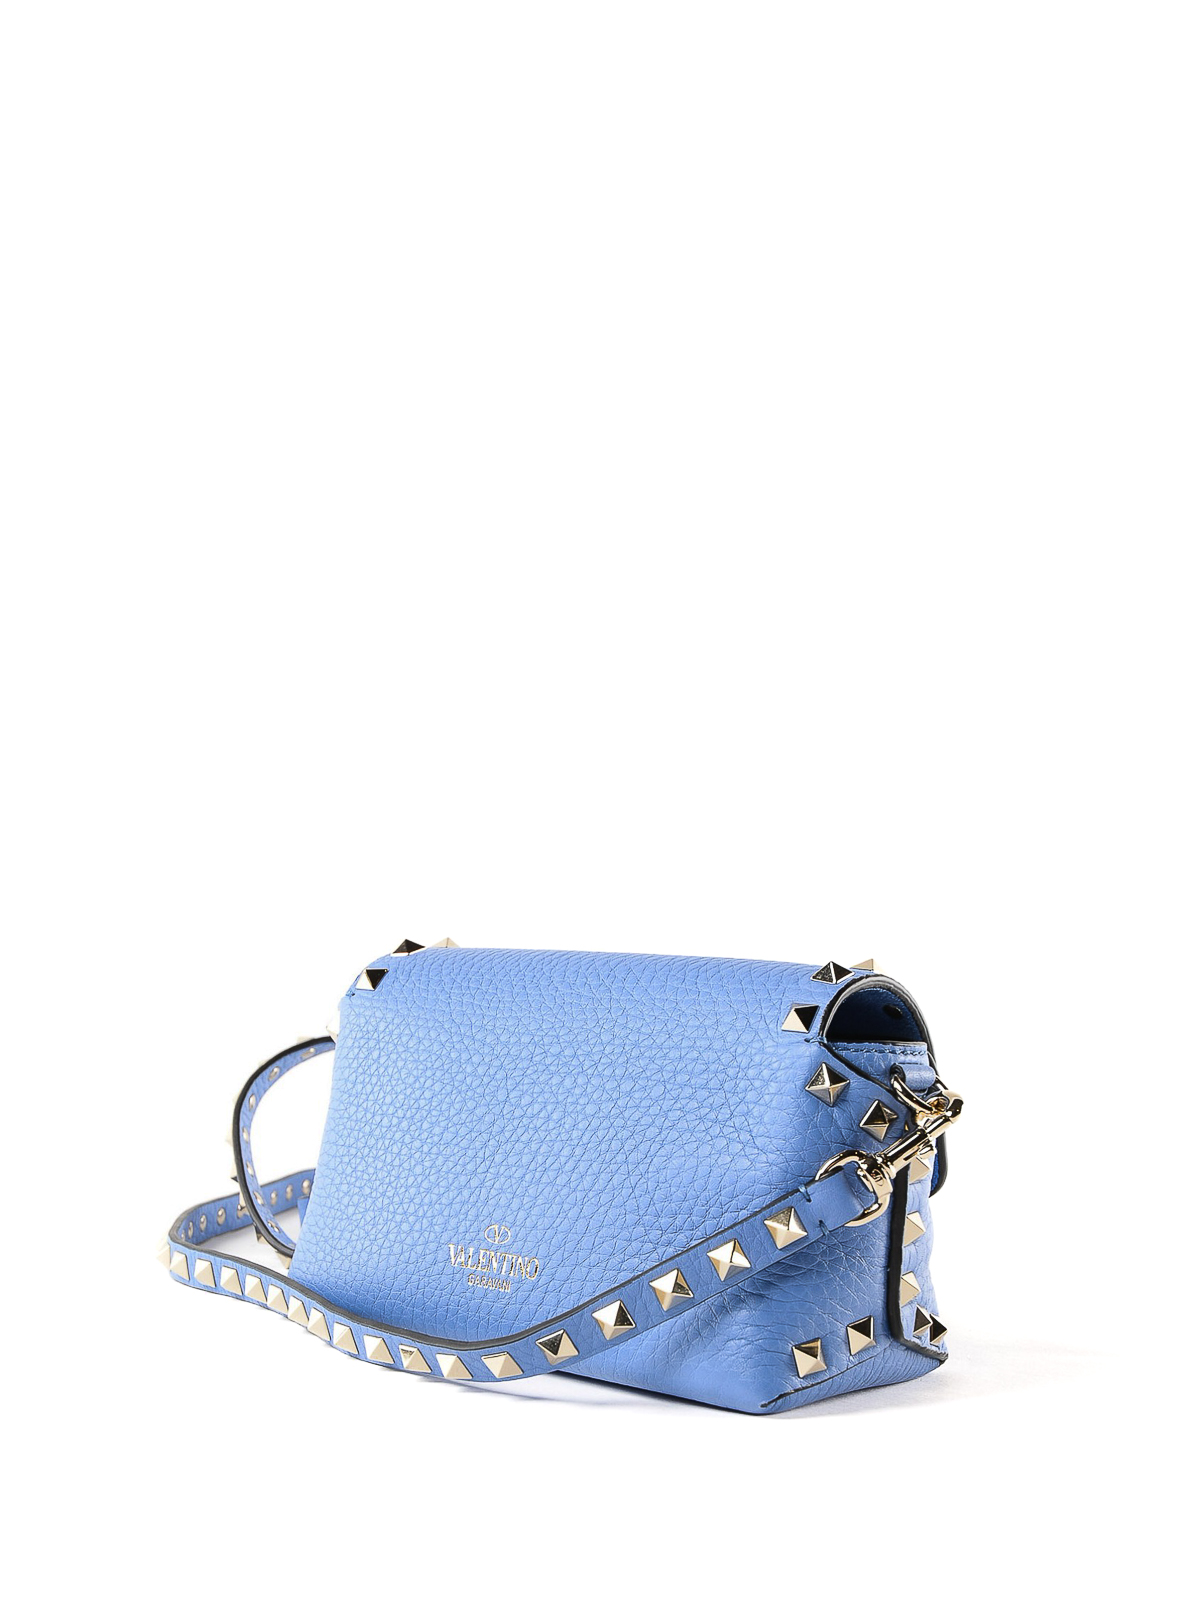 Love a crossbody and especially this @valentino Rockstud with its ligh